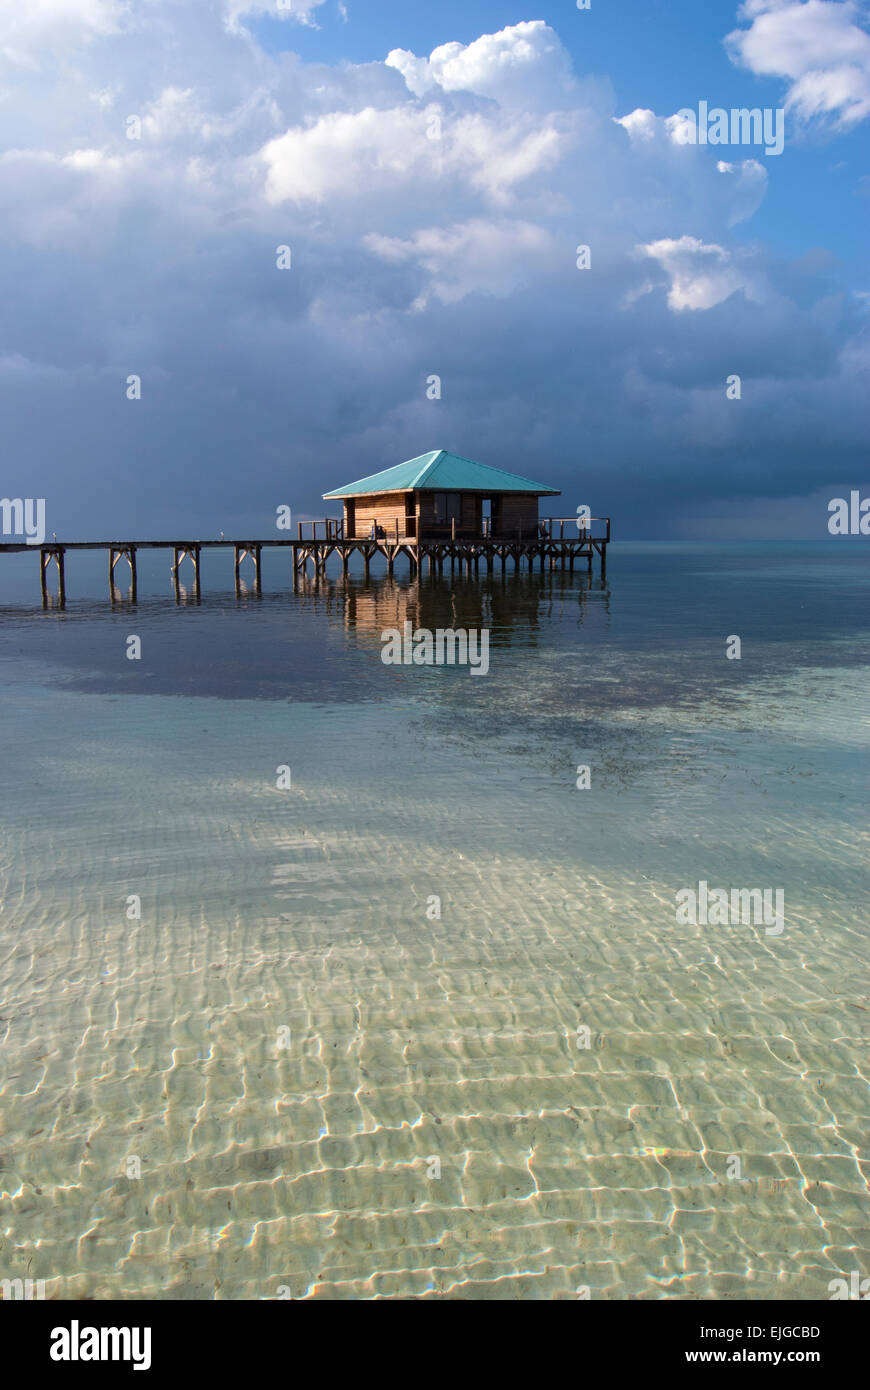 Diver's bar over Caribbean water Stock Photo